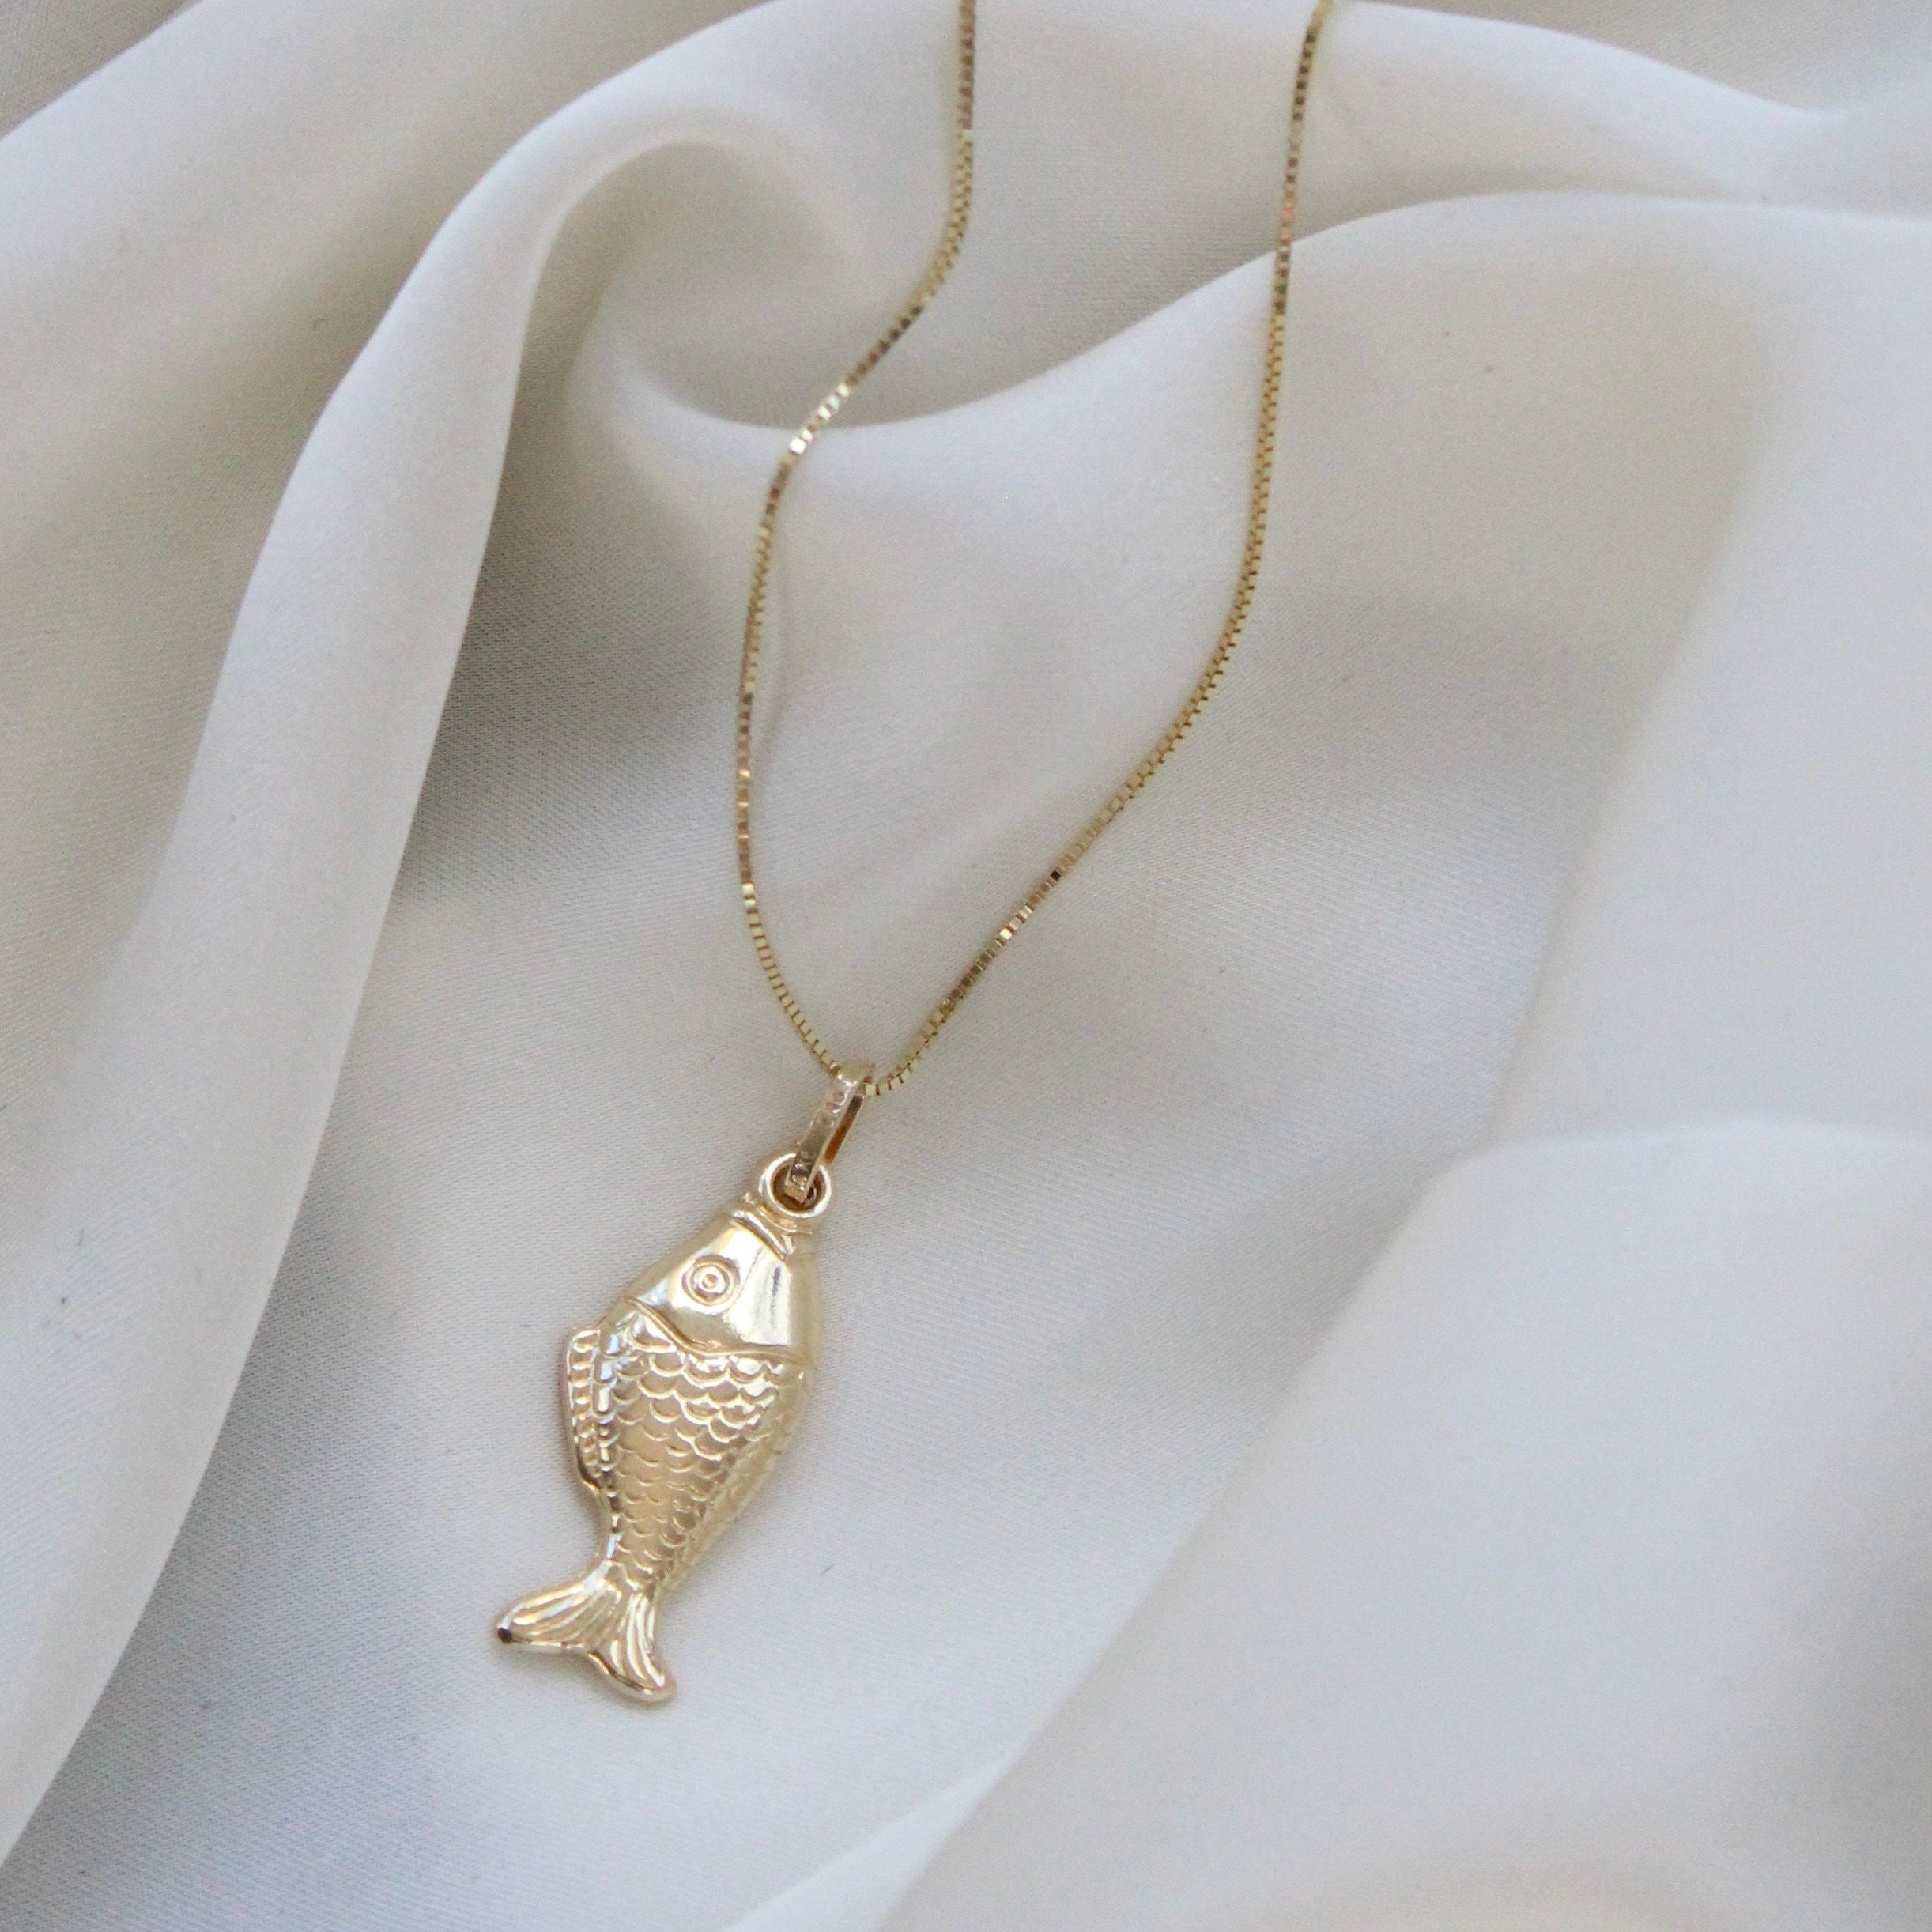 10K Yellow Gold Fish Necklace Charm Pendant